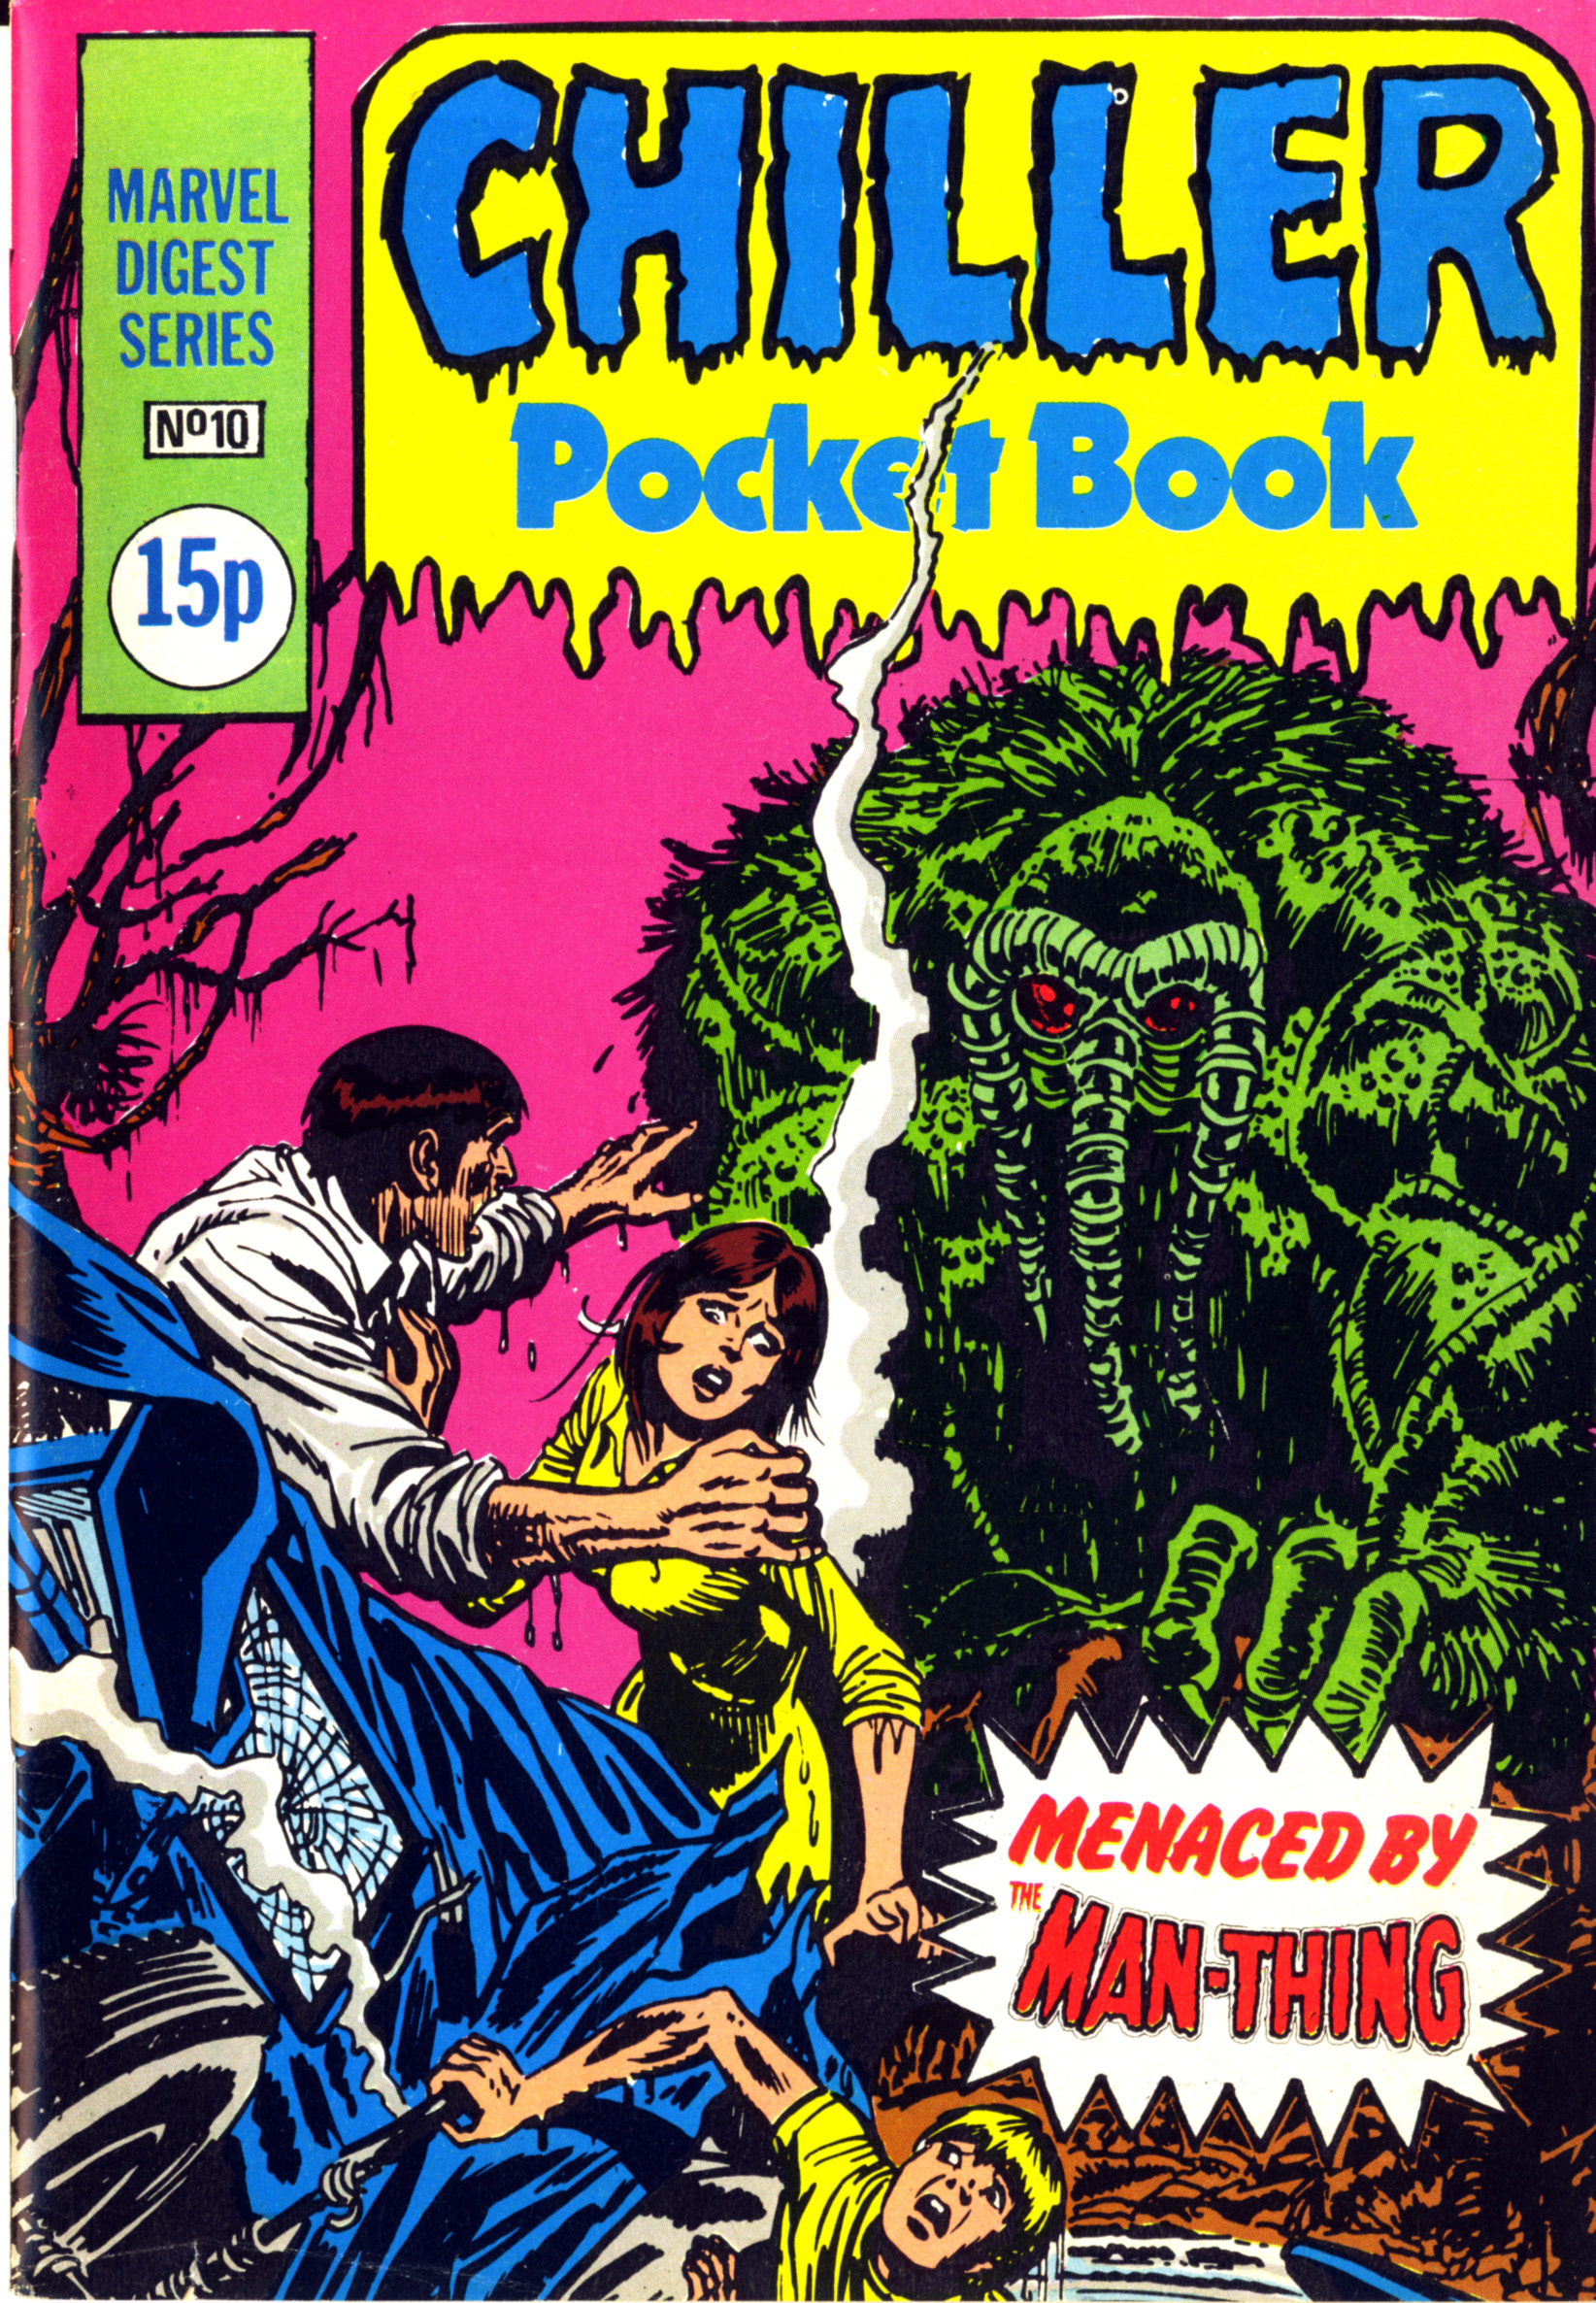 Read online Chiller Pocket Book comic -  Issue #10 - 1